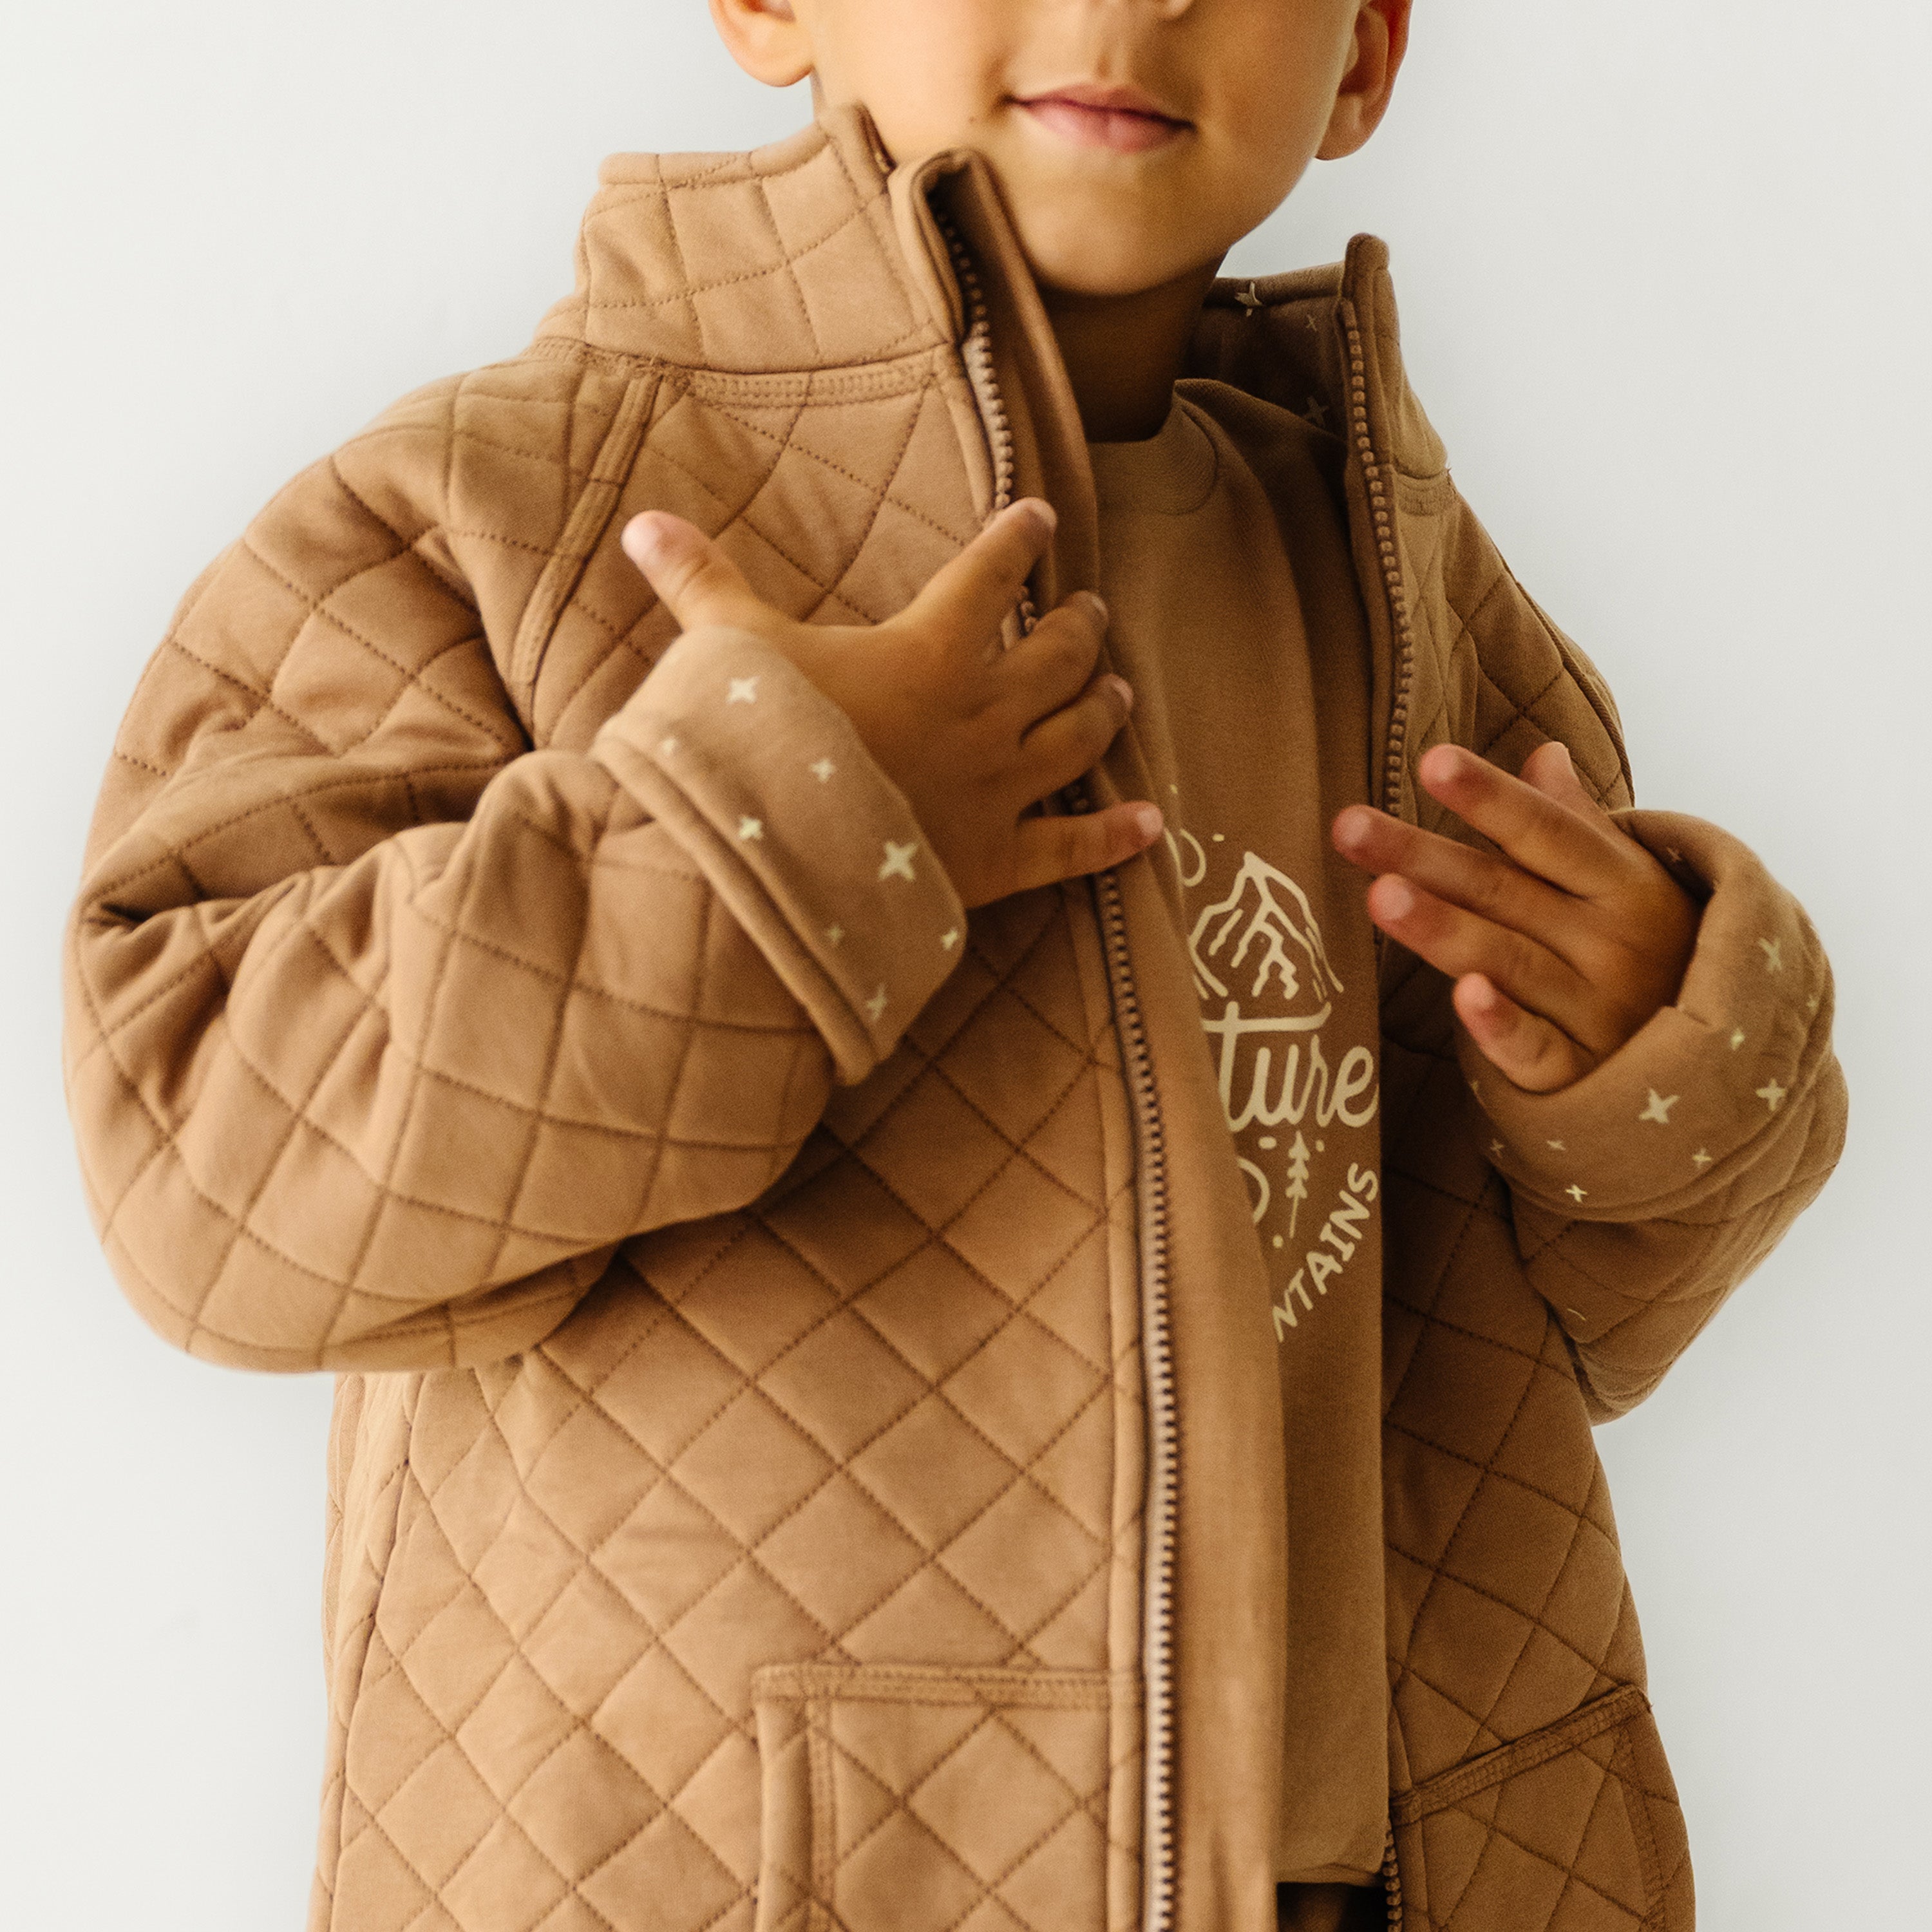 A young child in a brown Organic Kids Organic Merino Wool Zip Jacket - Cocoa over a hoodie gives a thumbs-up gesture. Only the lower half of the child's face is visible. The background is plain and